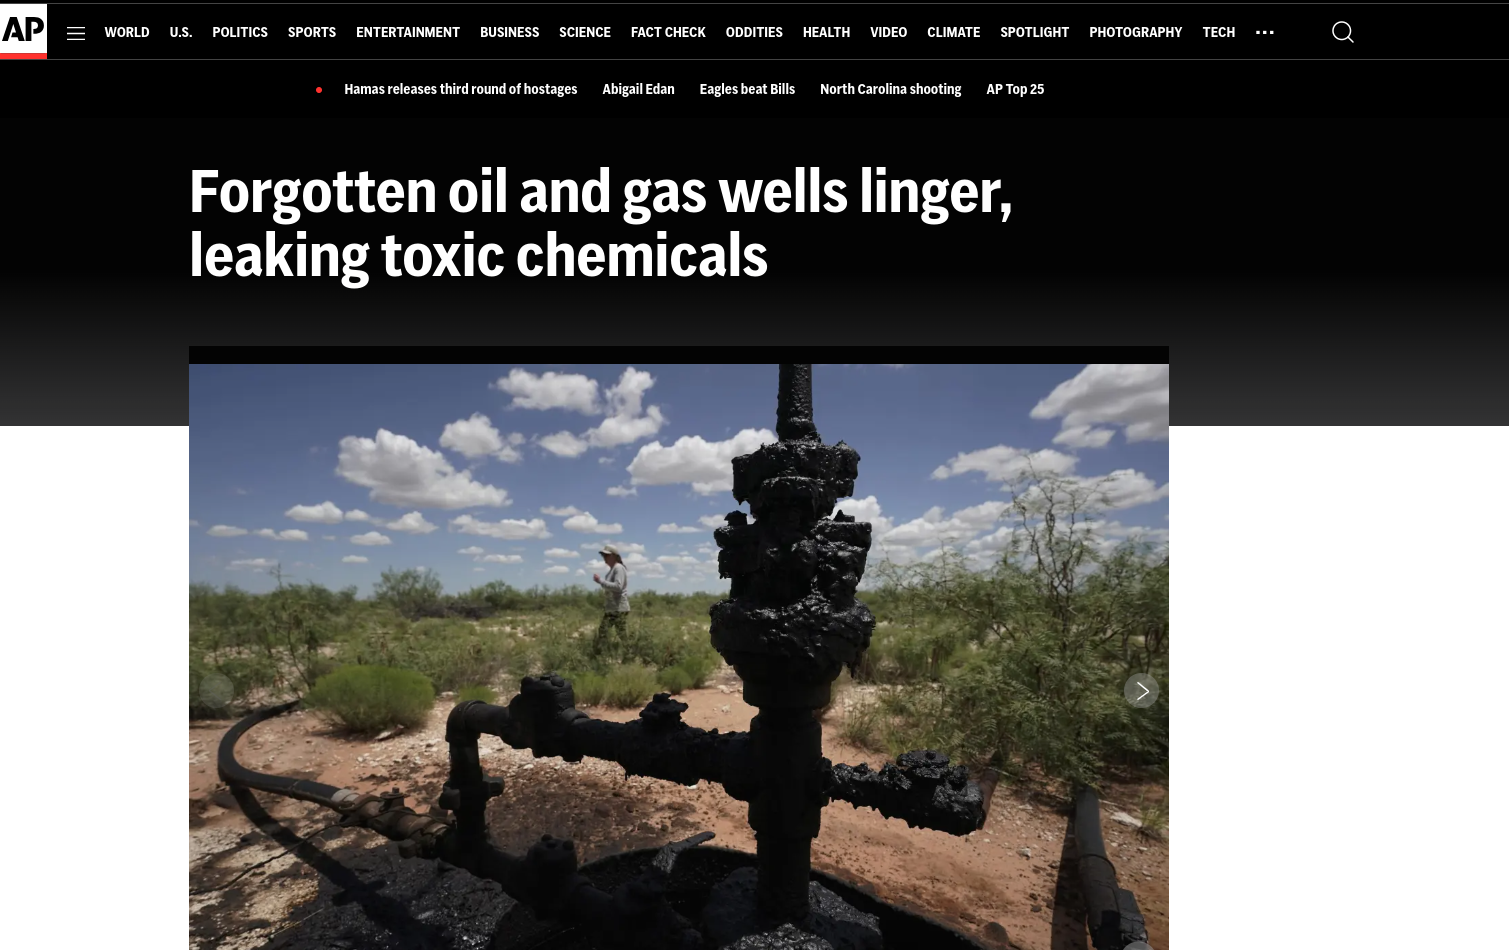 Associated Press - Forgotten oil and gas wells linger, leaking toxic chemicals